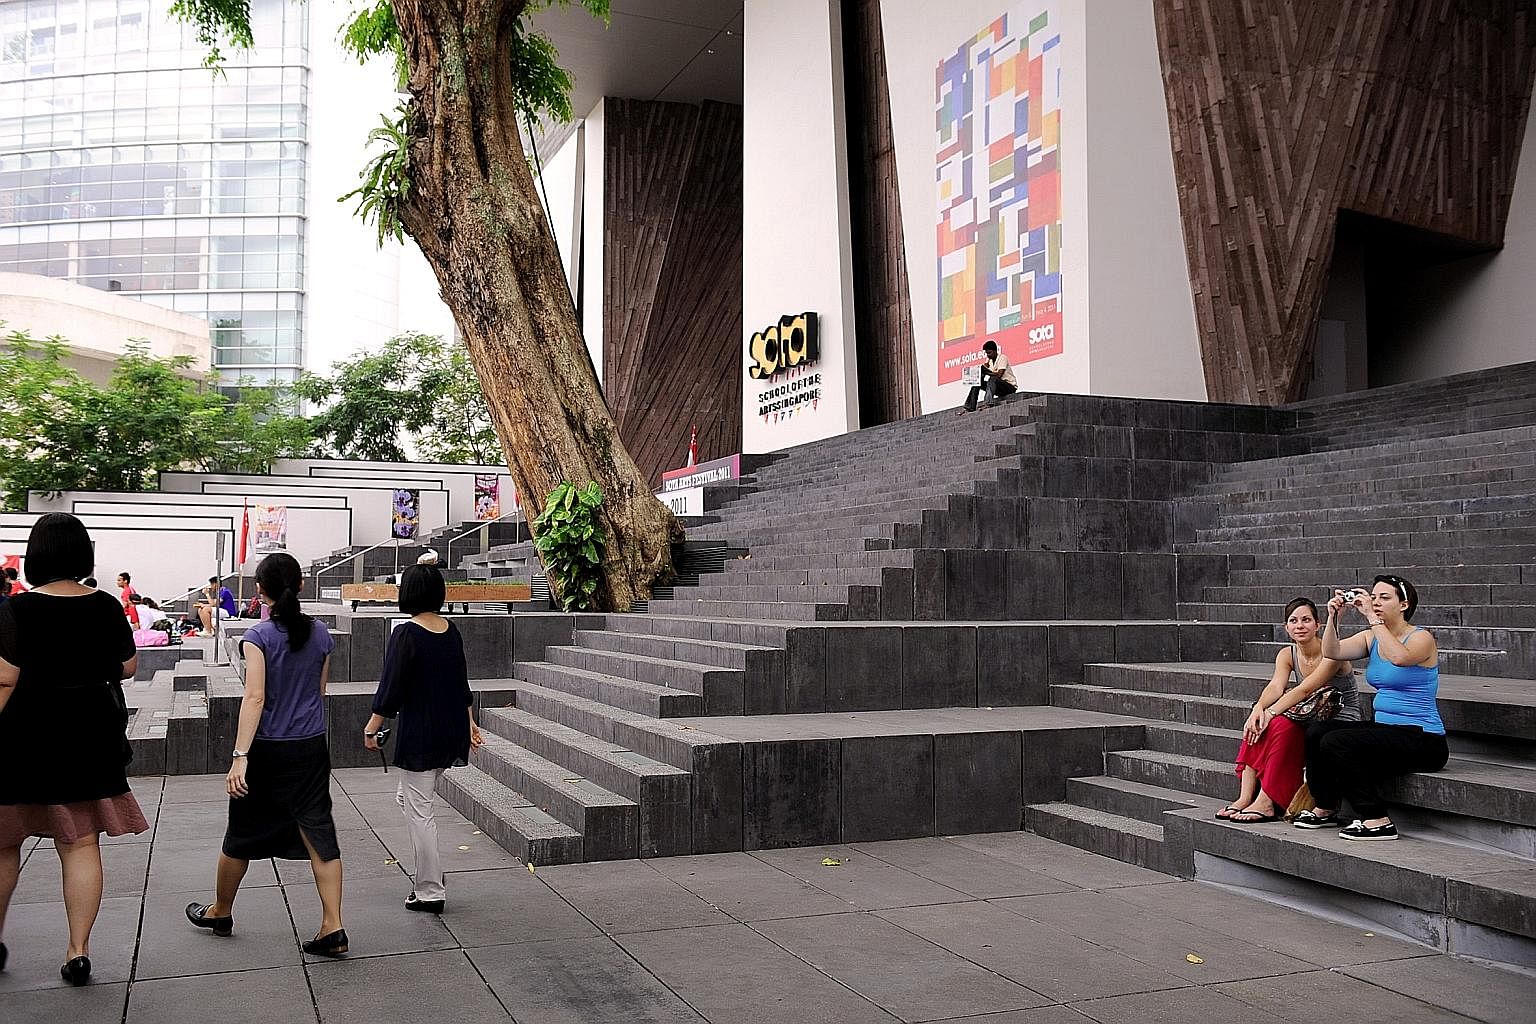 The School of the Arts campus in Orchard Road. With the centrepiece of Singapore's future economic strategy being creativity and innovation, the question is whether we should have a mini Sota in every school, says the writer.